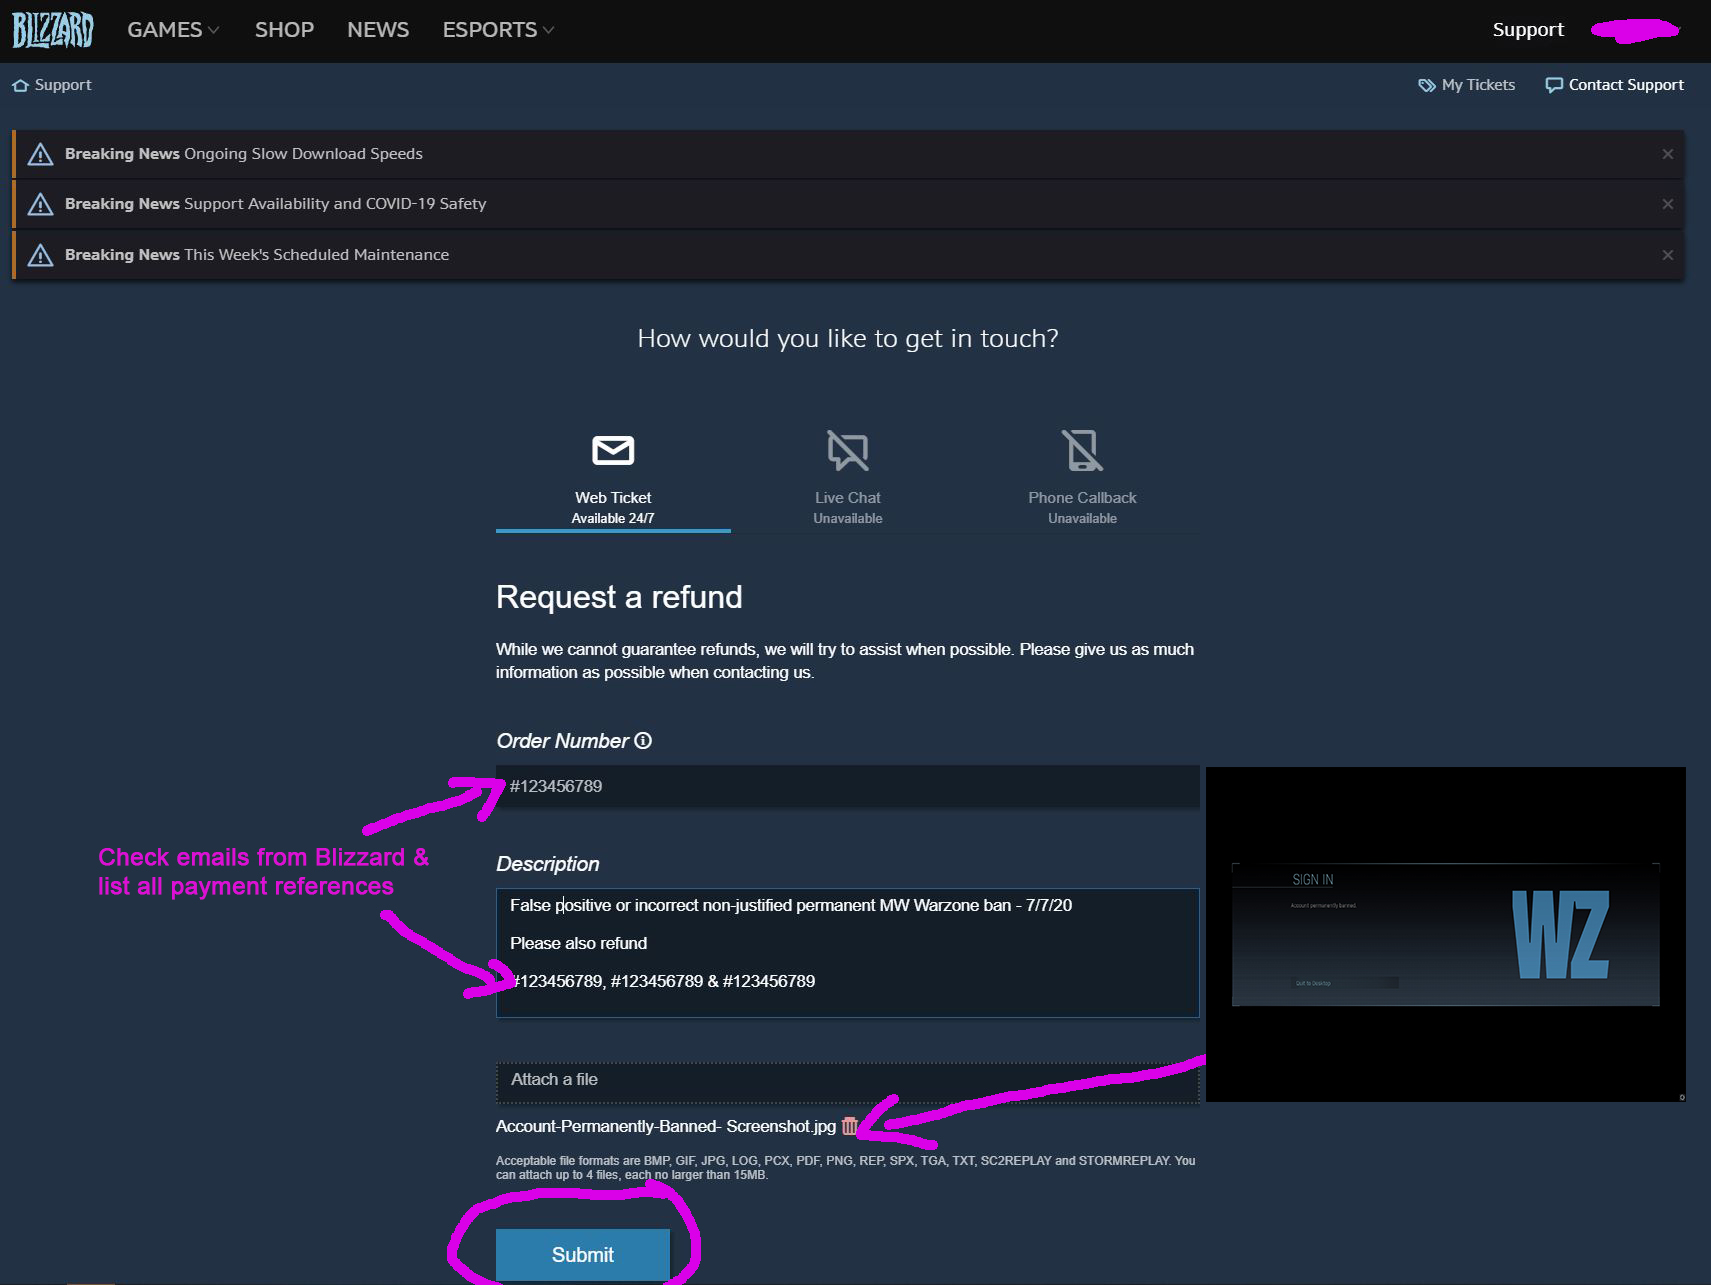 How to Get a Refund for a Battle.net Game